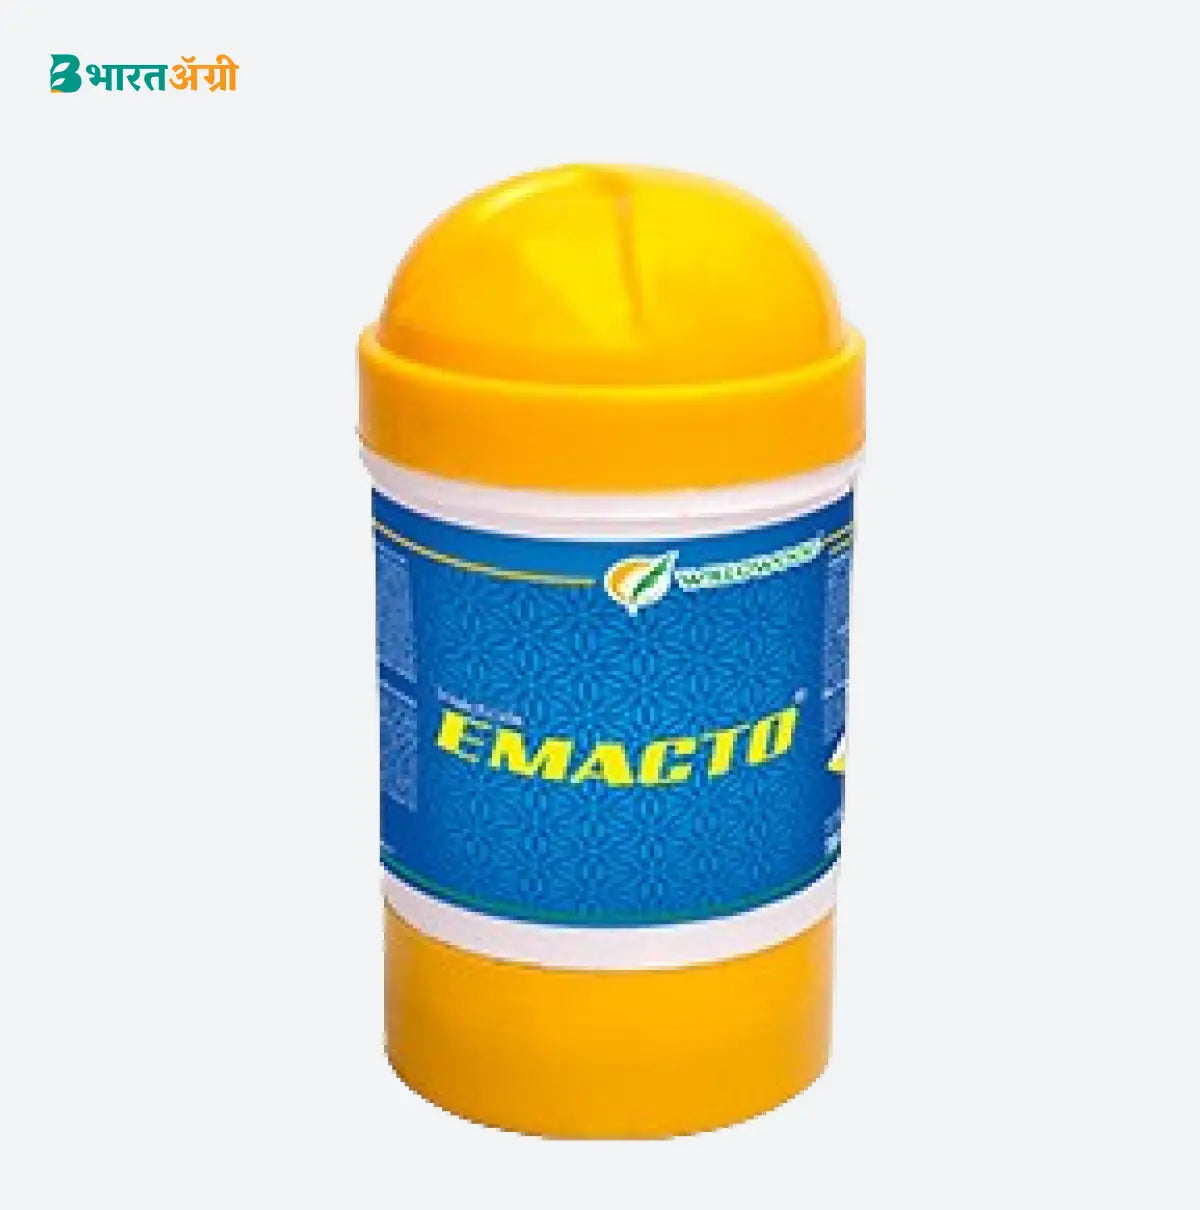 Willowood Emacto (Emamectin Benzoate 5% SG) Insecticide| BharatAgri